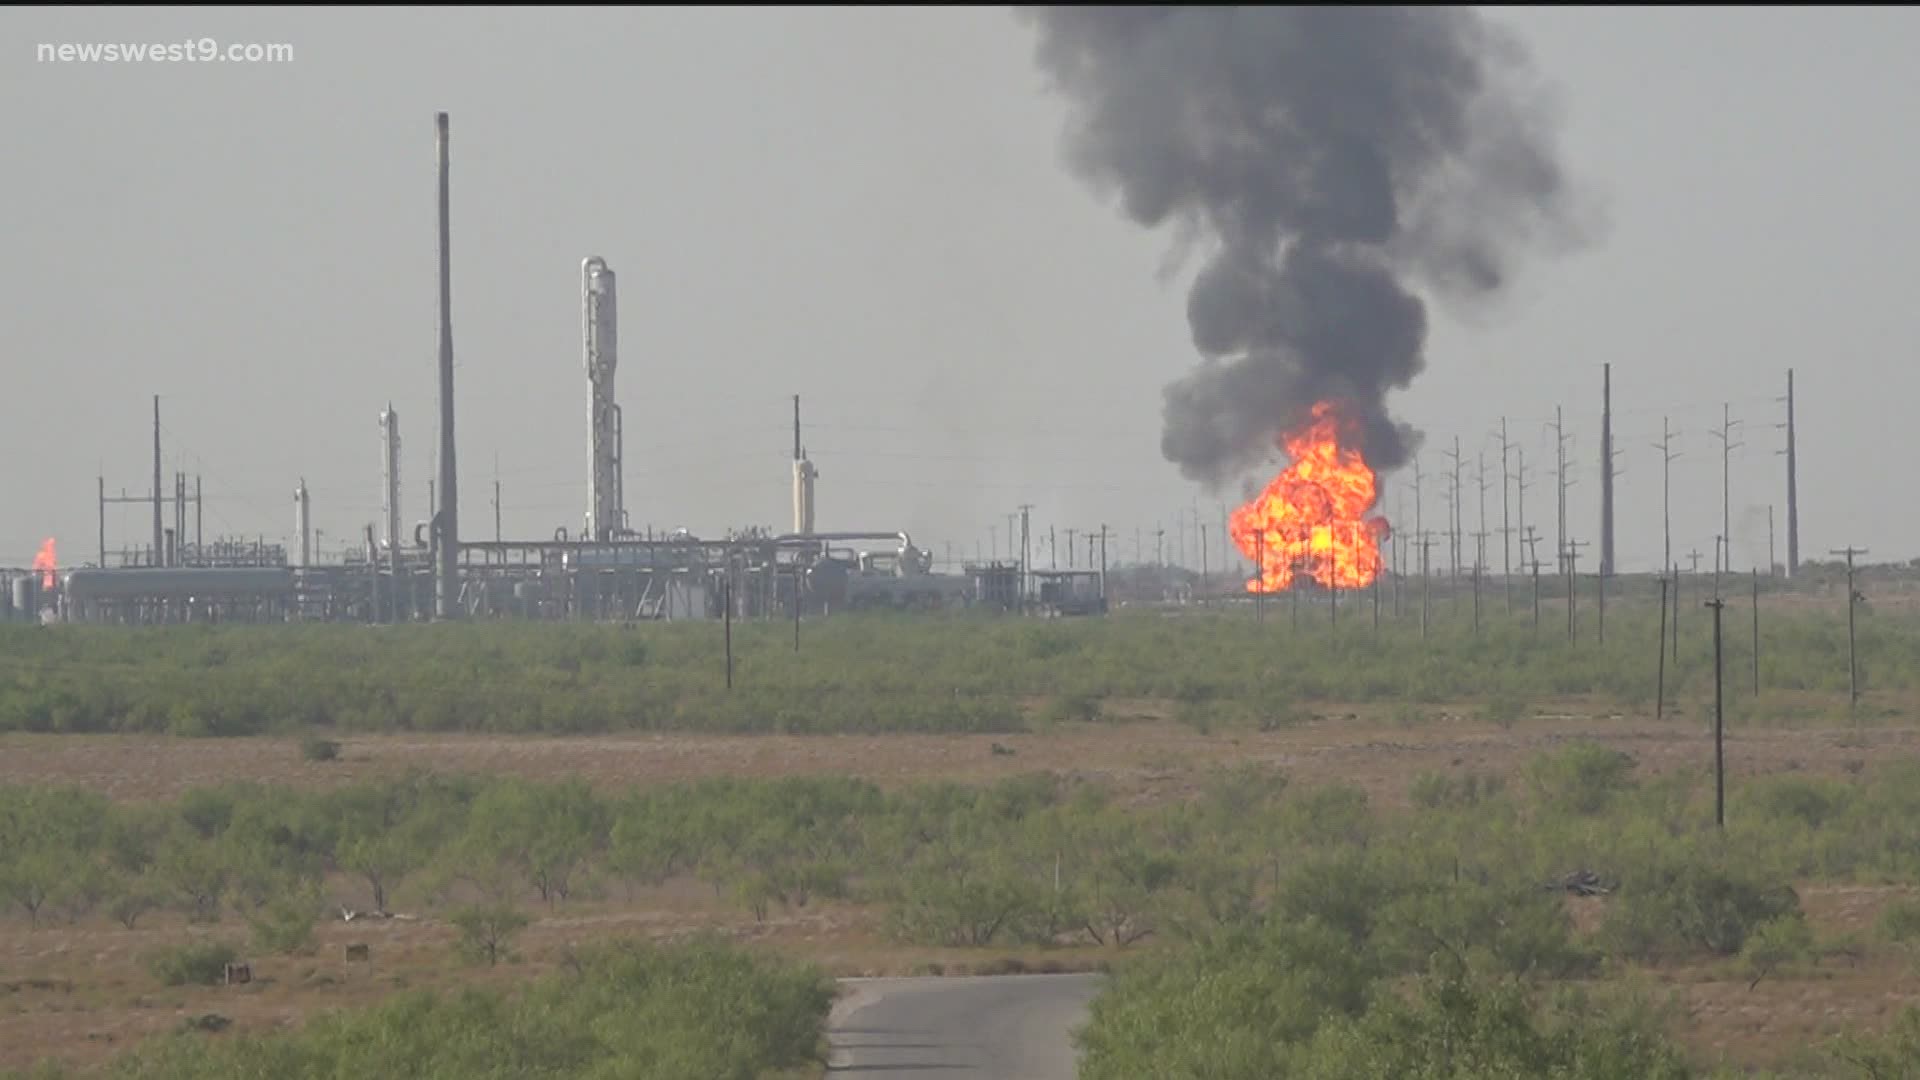 The fire happened near FM 1357 and FM 1379